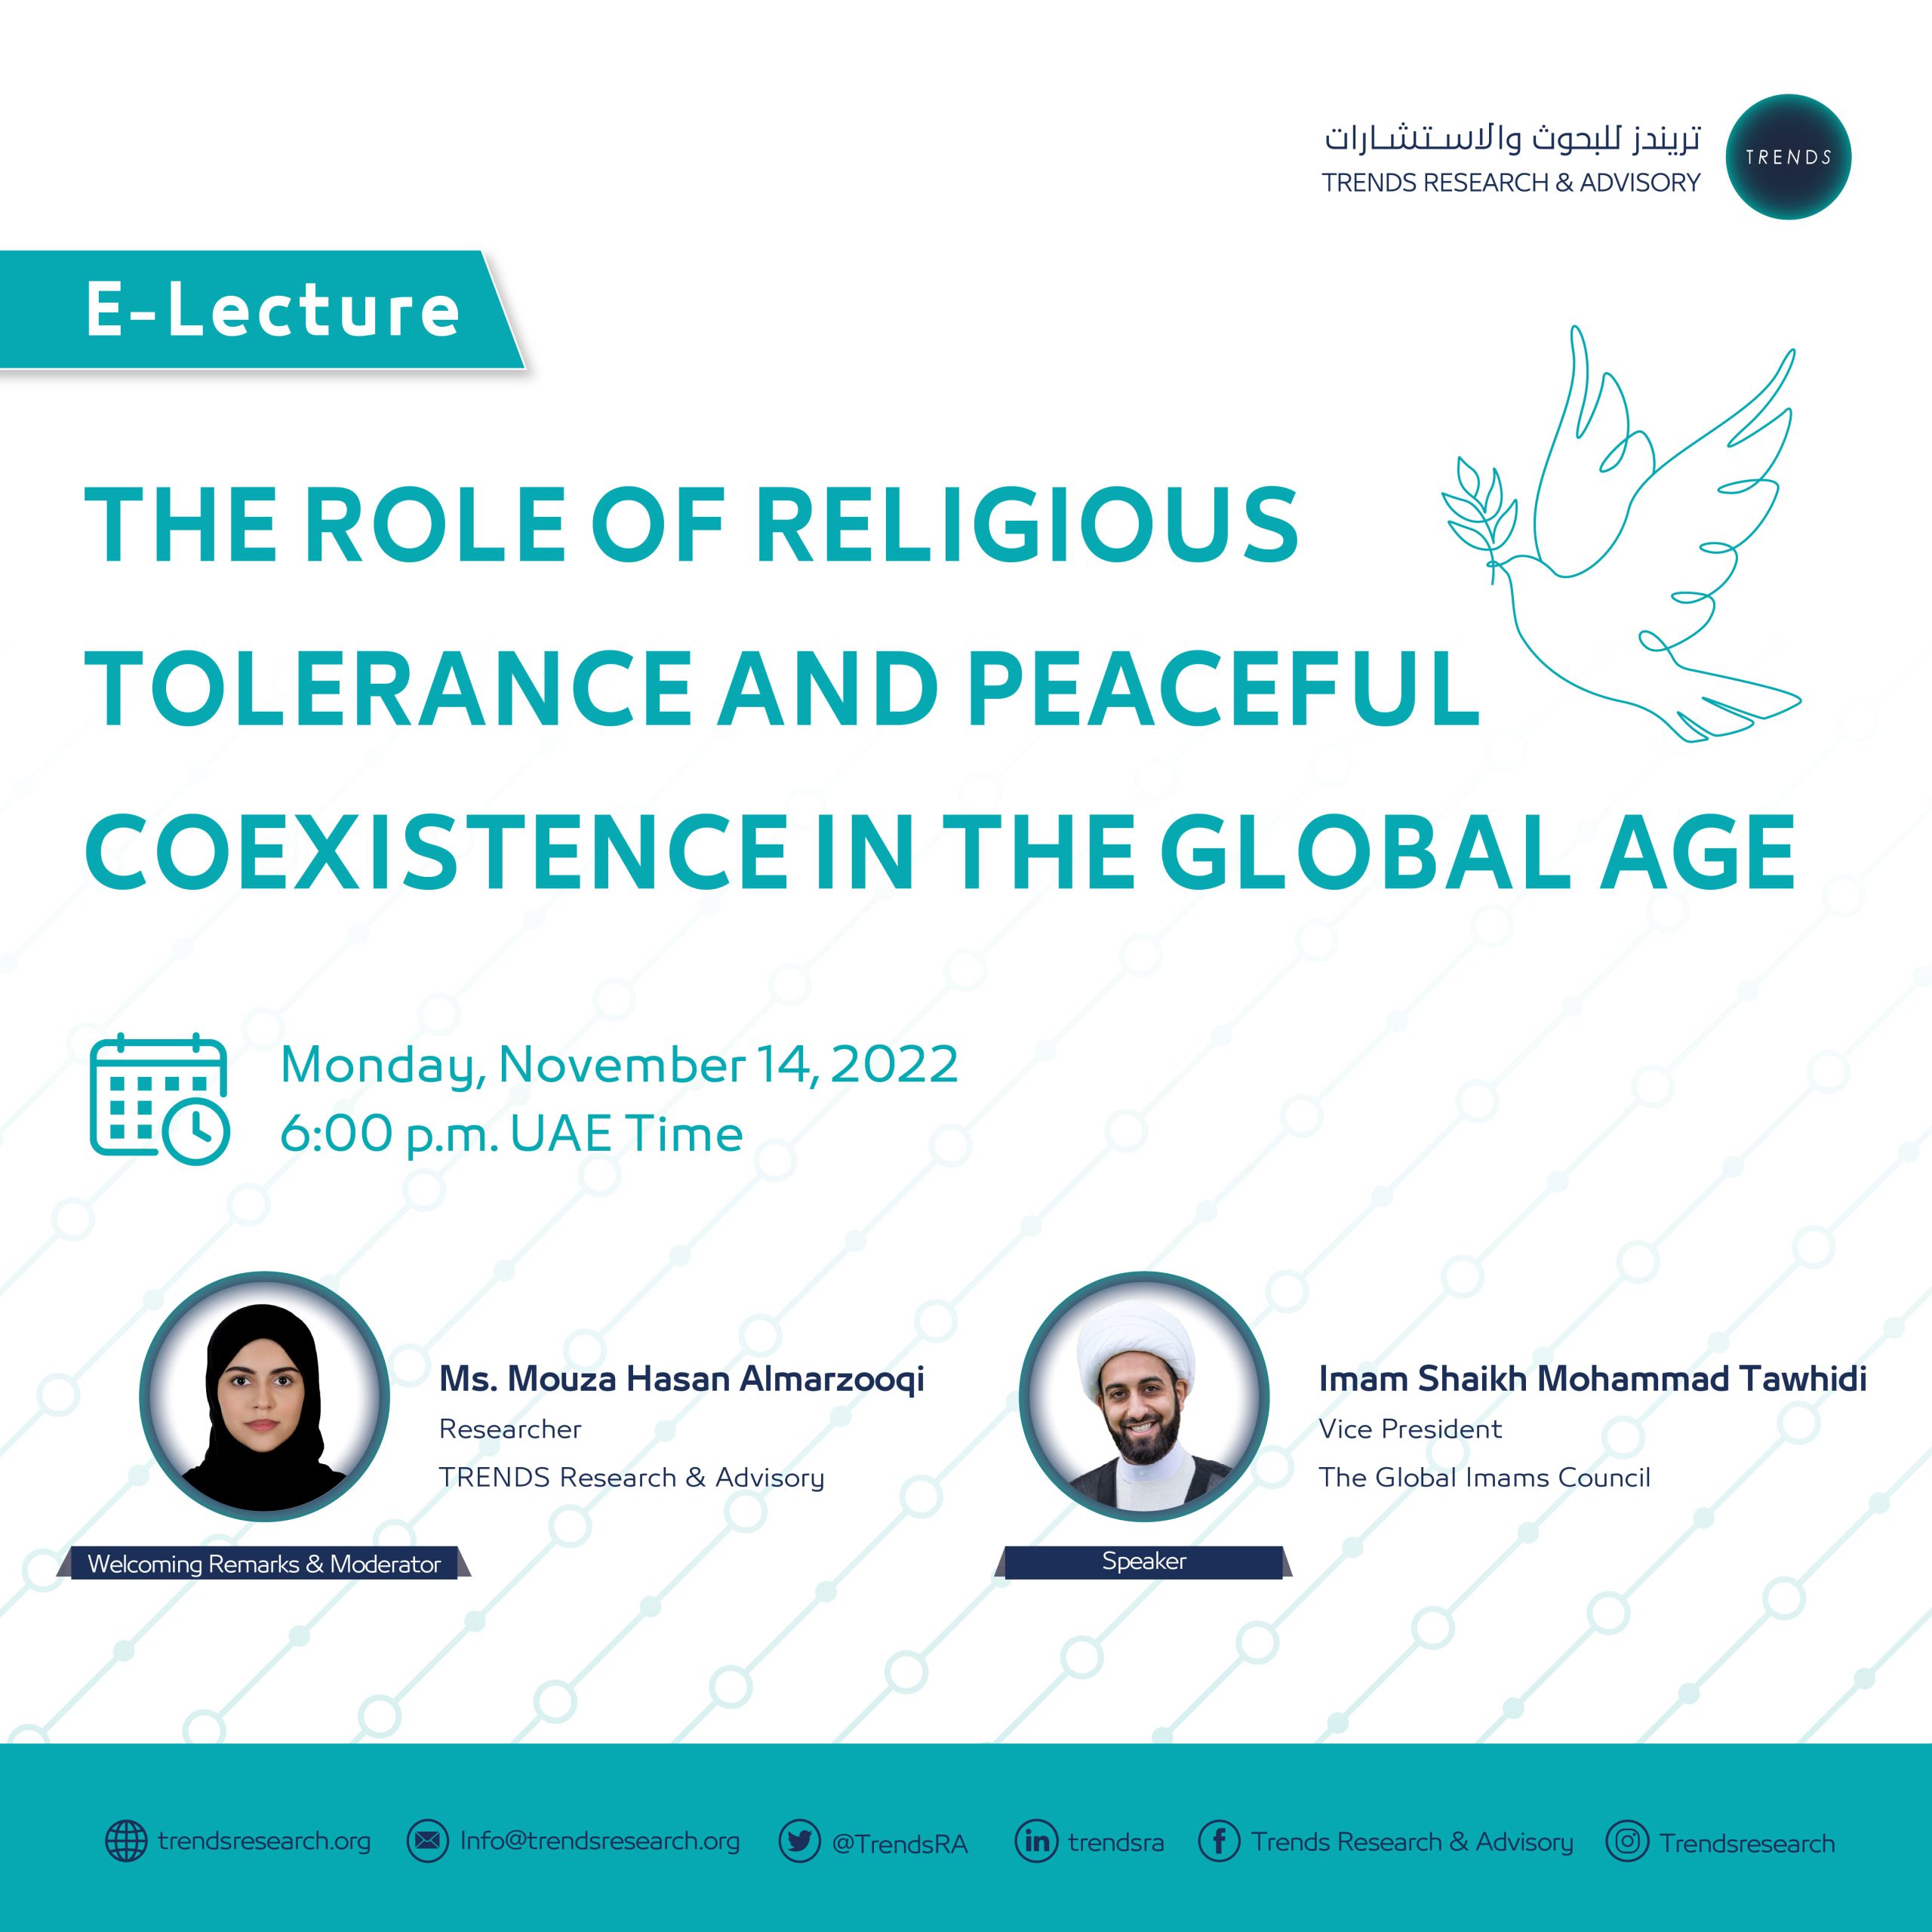 The Role of Religious Tolerance and Peaceful Coexistence in the Global Age